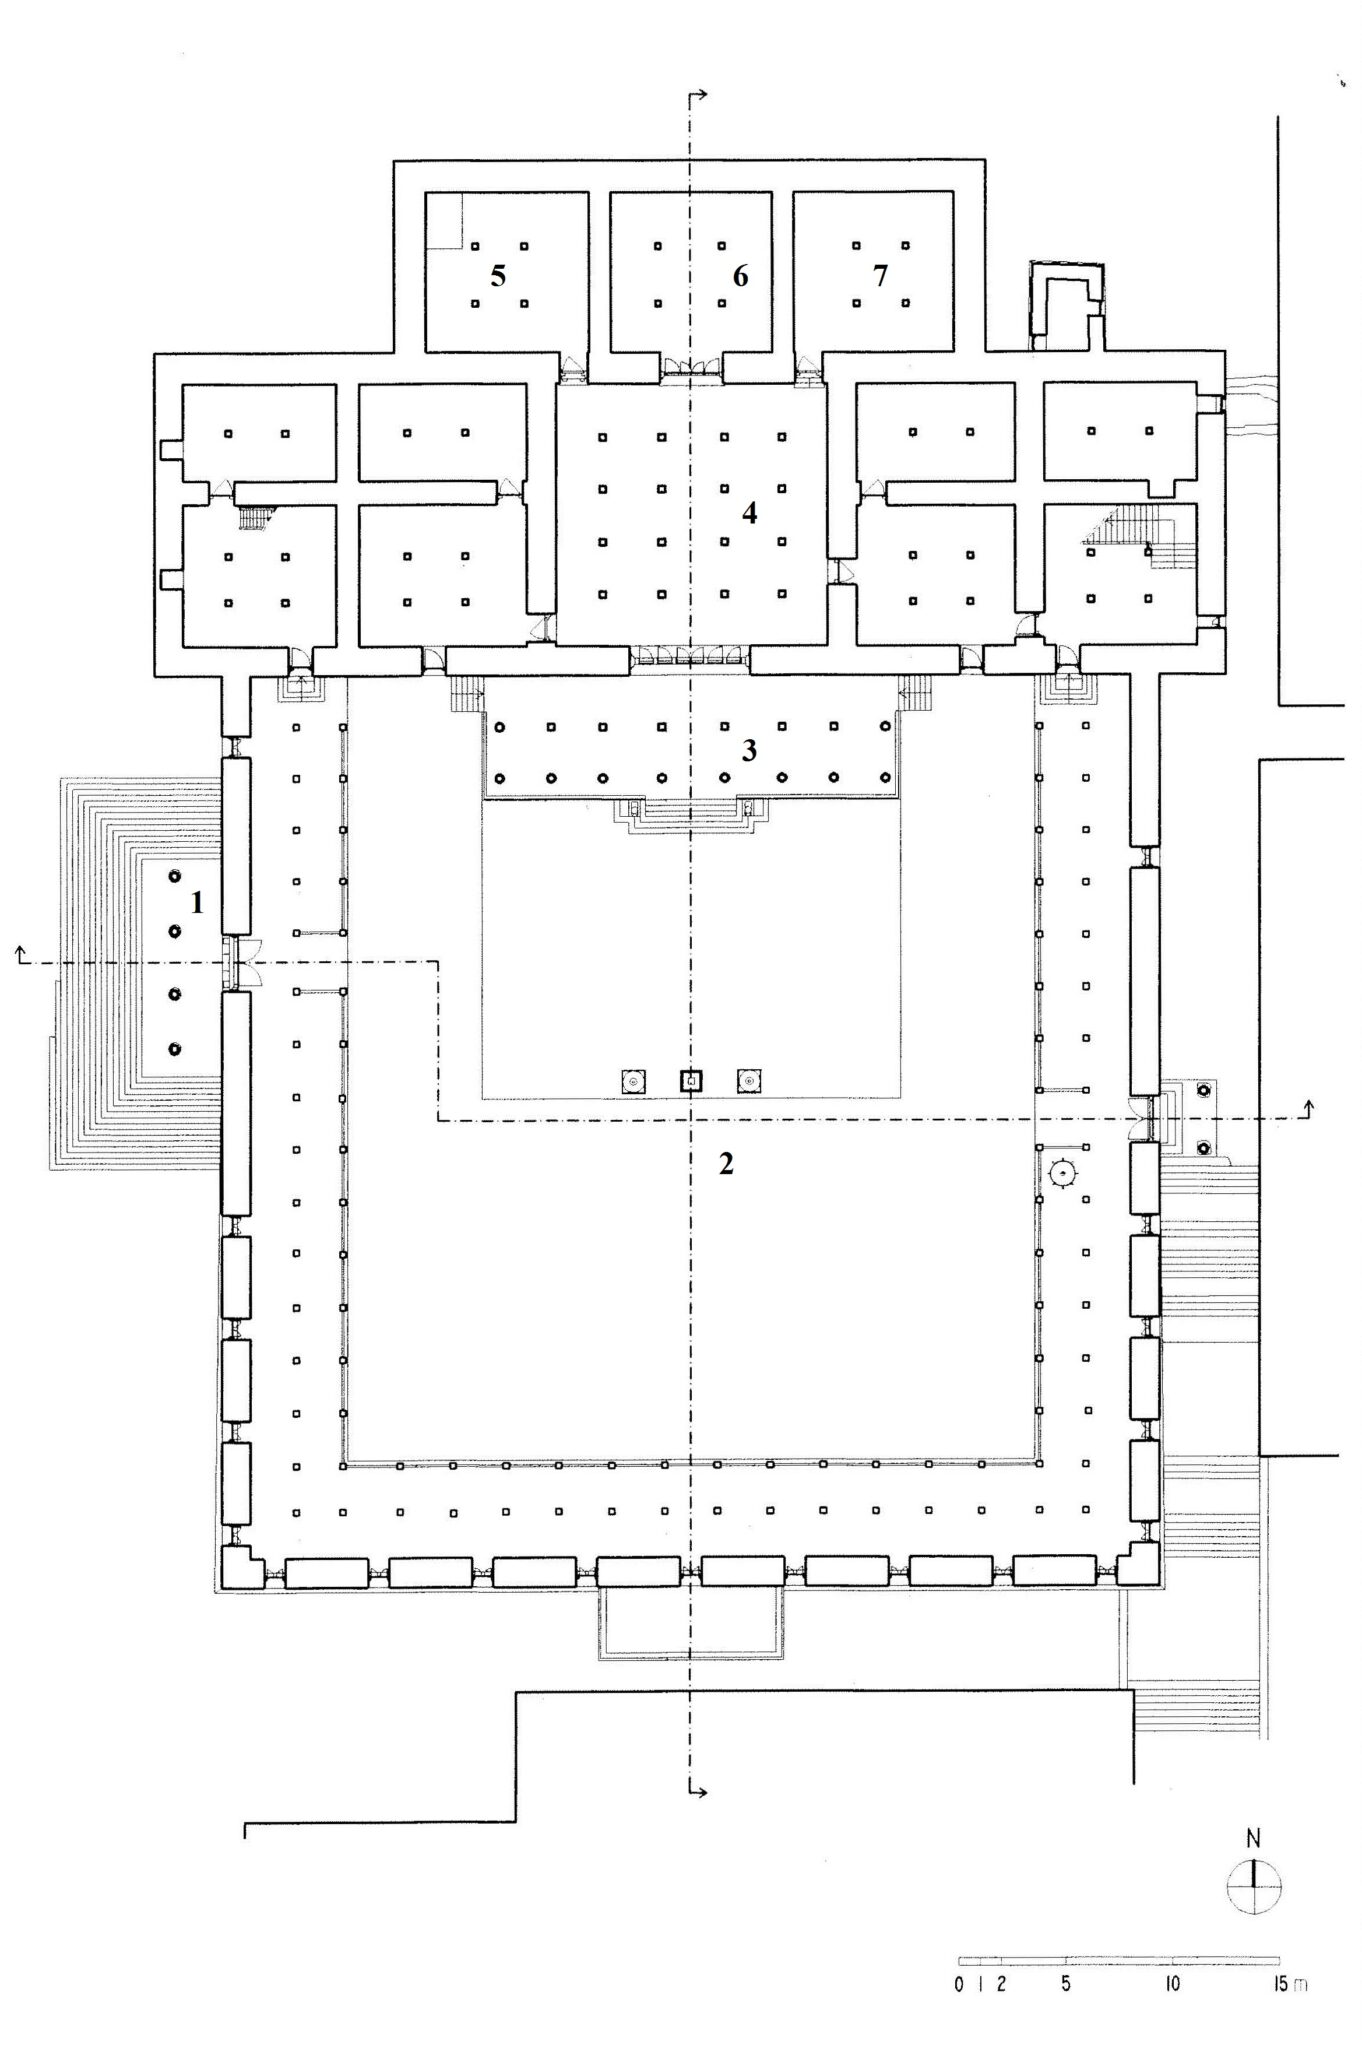 Floorplan in black and white of monastery with component structures numbered; scale and compass at bottom right